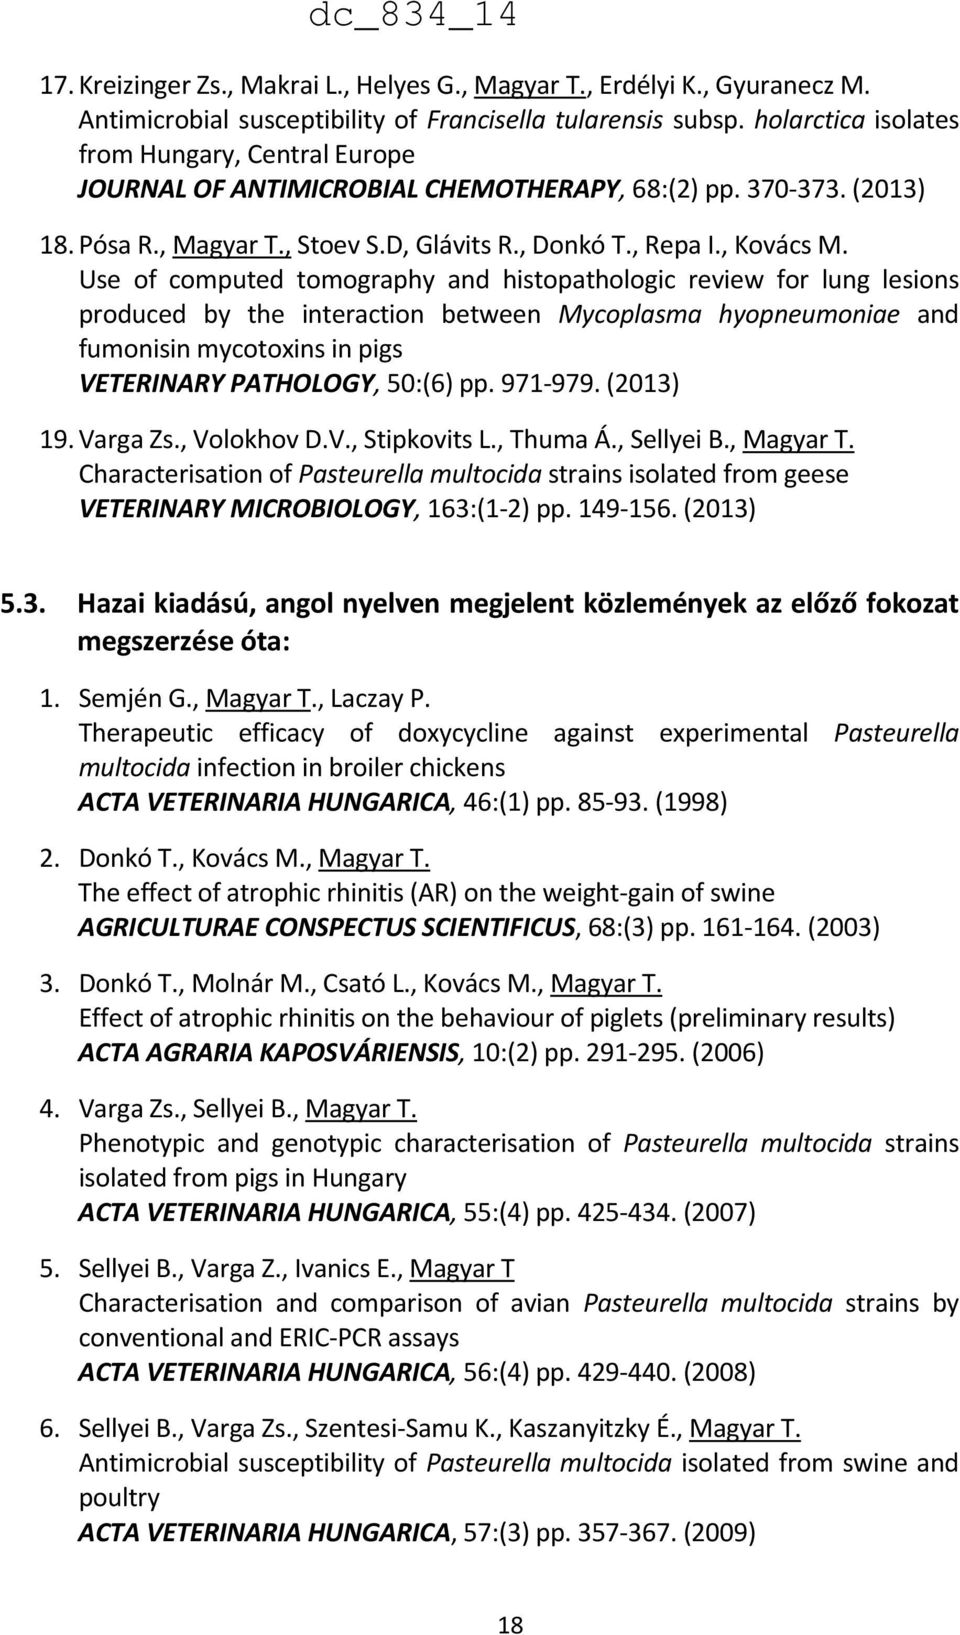 Use of computed tomography and histopathologic review for lung lesions produced by the interaction between Mycoplasma hyopneumoniae and fumonisin mycotoxins in pigs VETERINARY PATHOLOGY, 50:(6) pp.